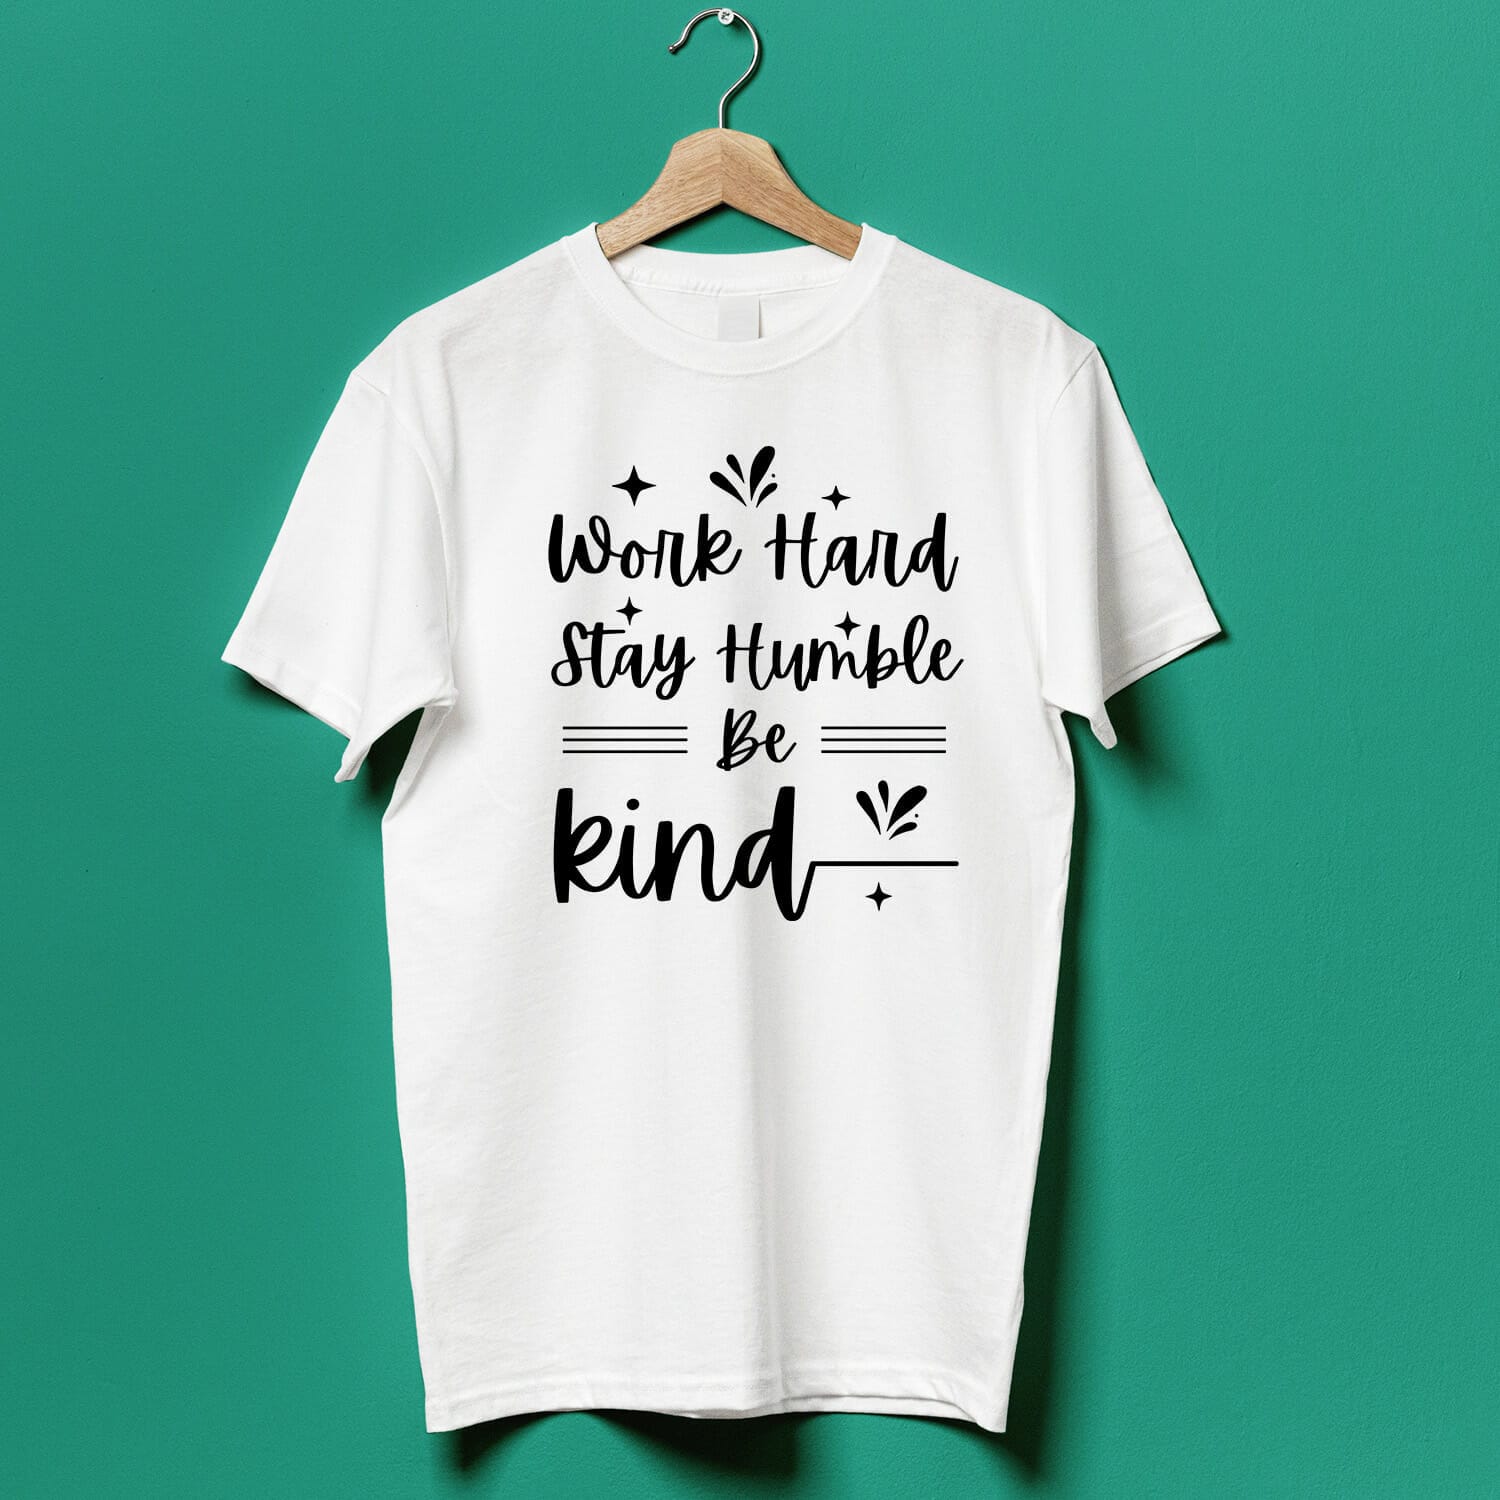 Work Hard, stay Humble and be kind positive quote t-shirt design